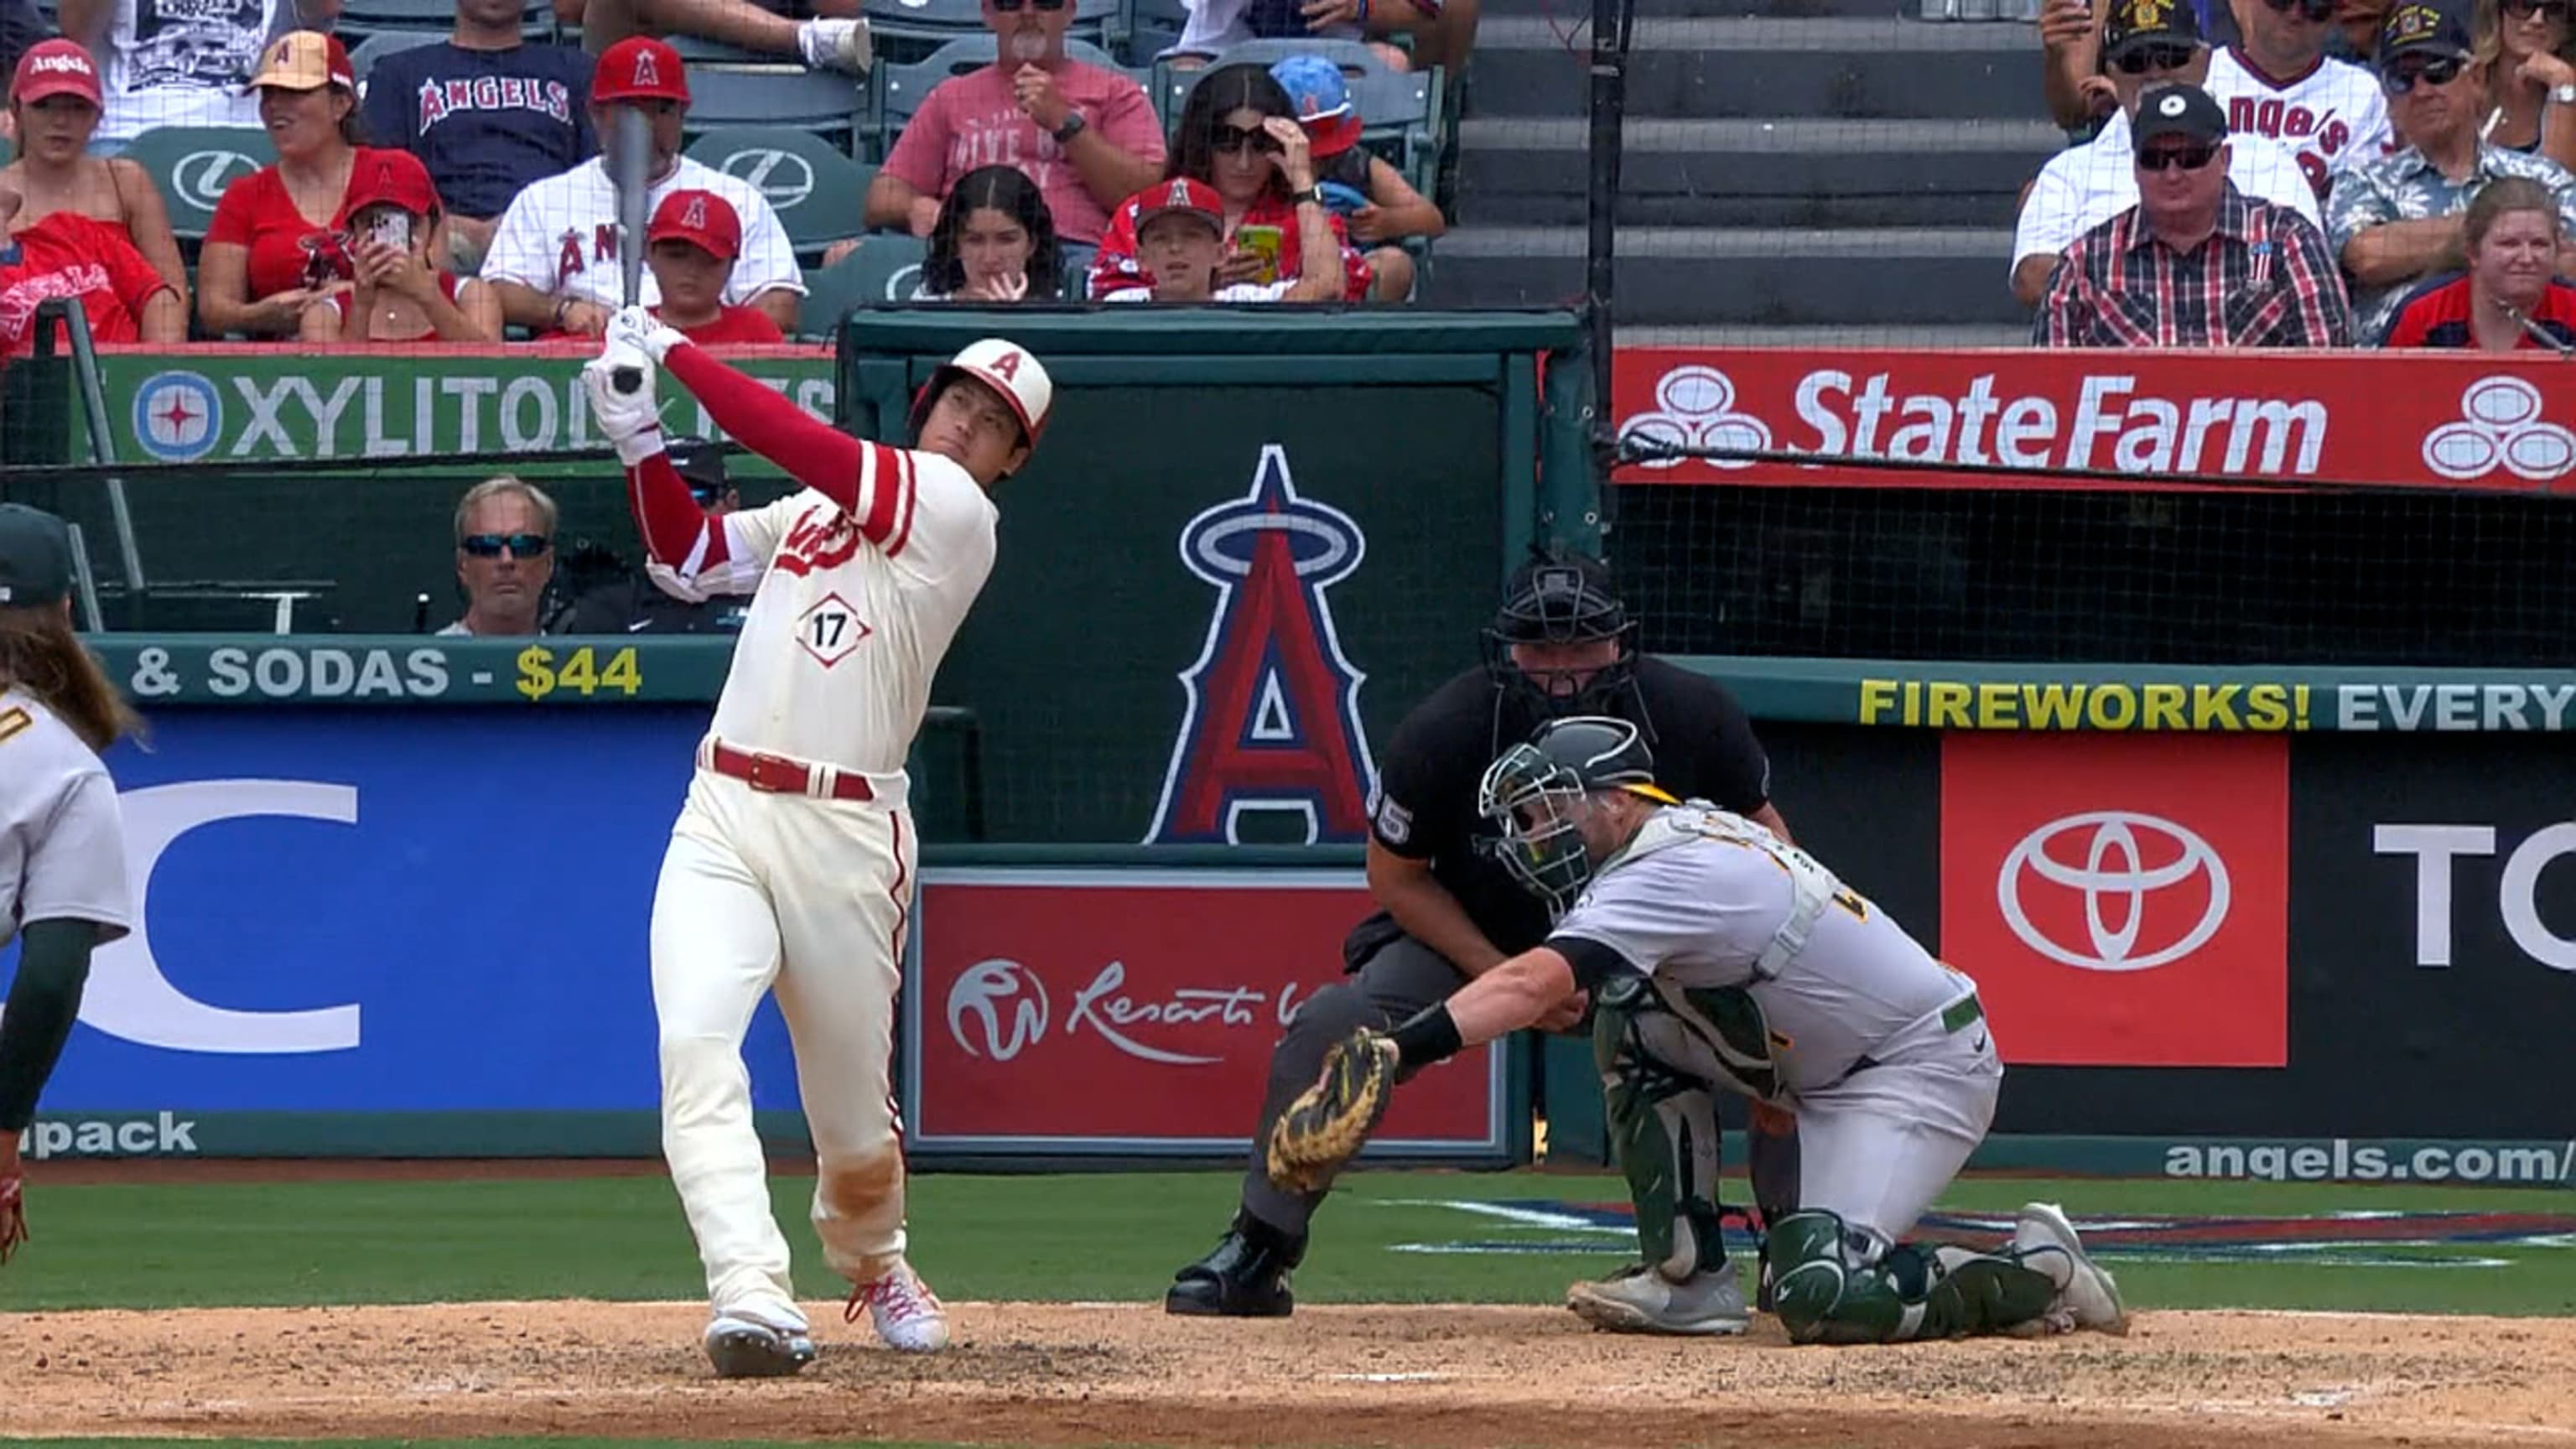 Angels use 3 solo homers to cool off MLB-leading Braves with 4-1 victory